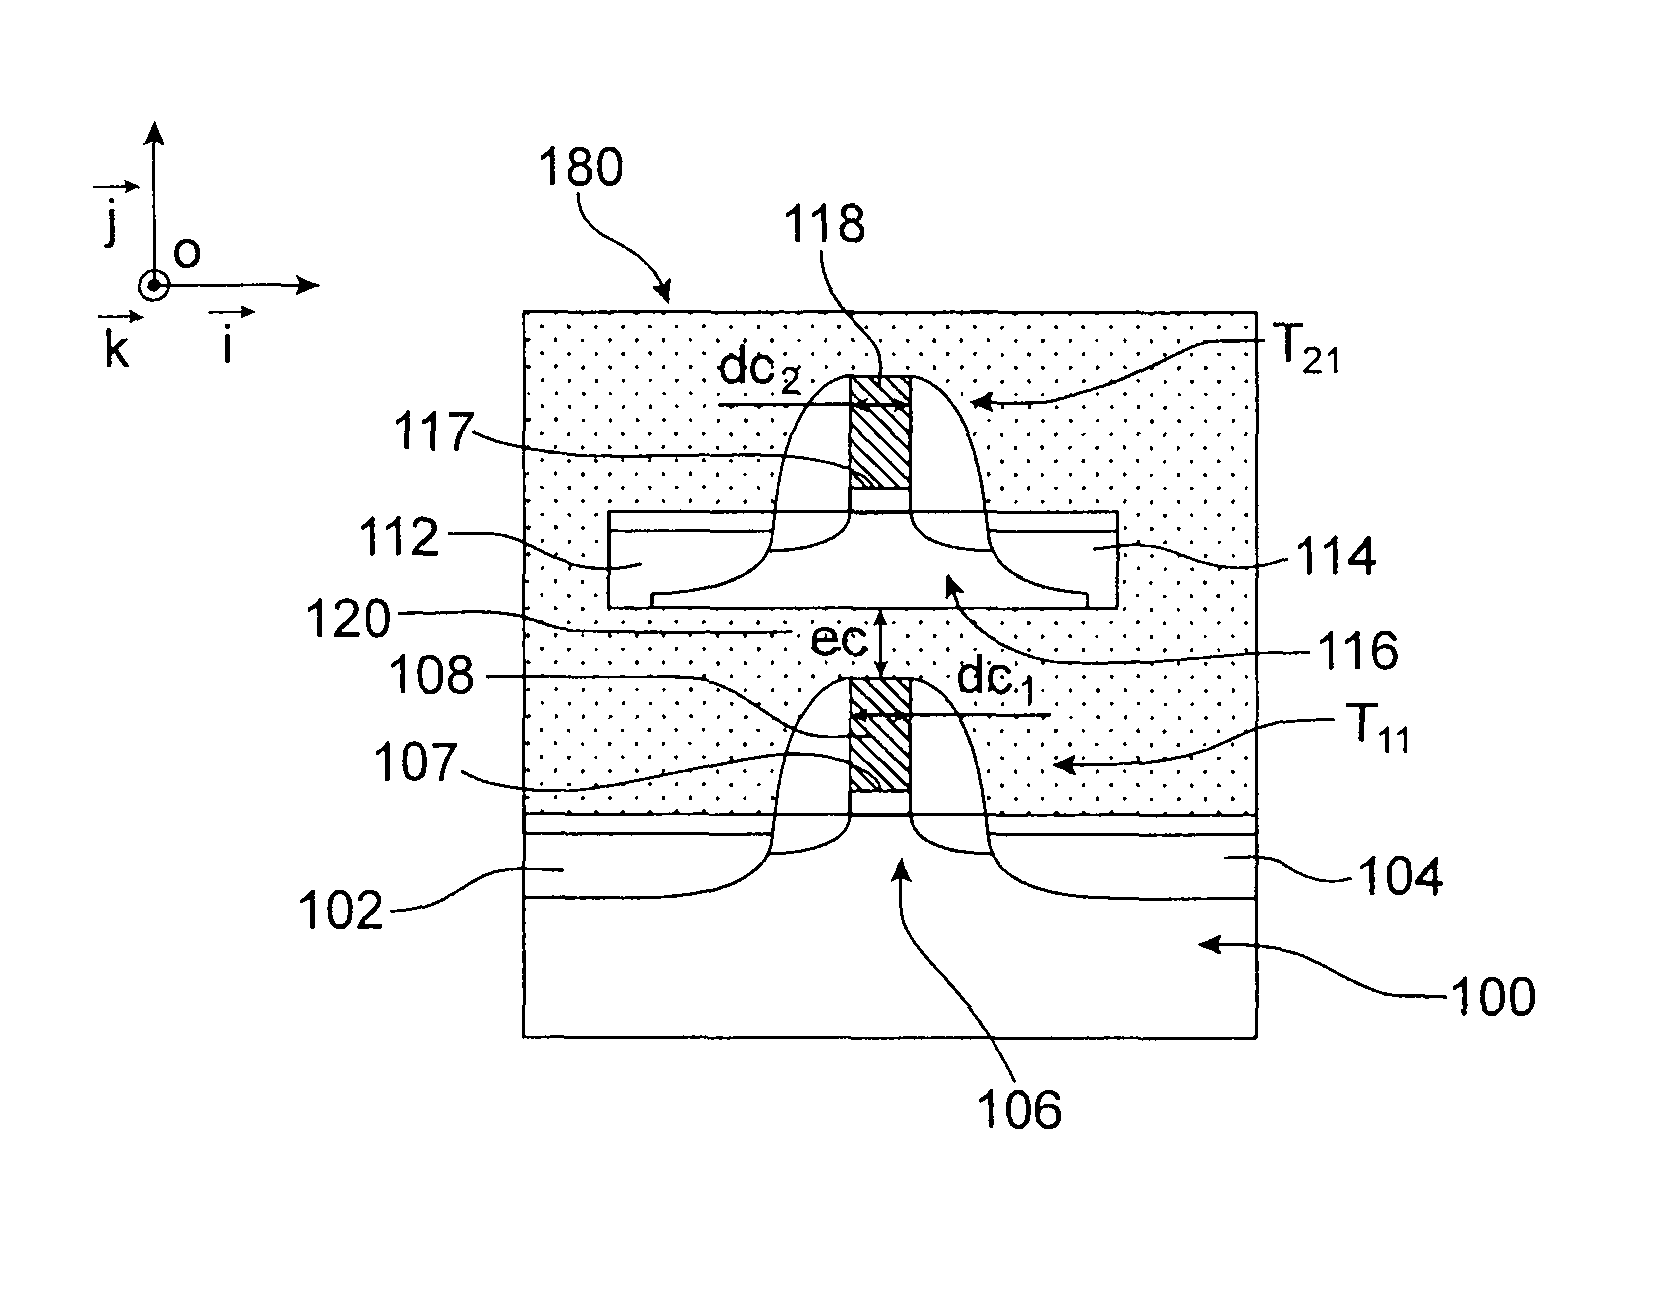 SRAM memory cell having transistors integrated at several levels and the threshold voltage VT of which is dynamically adjustable